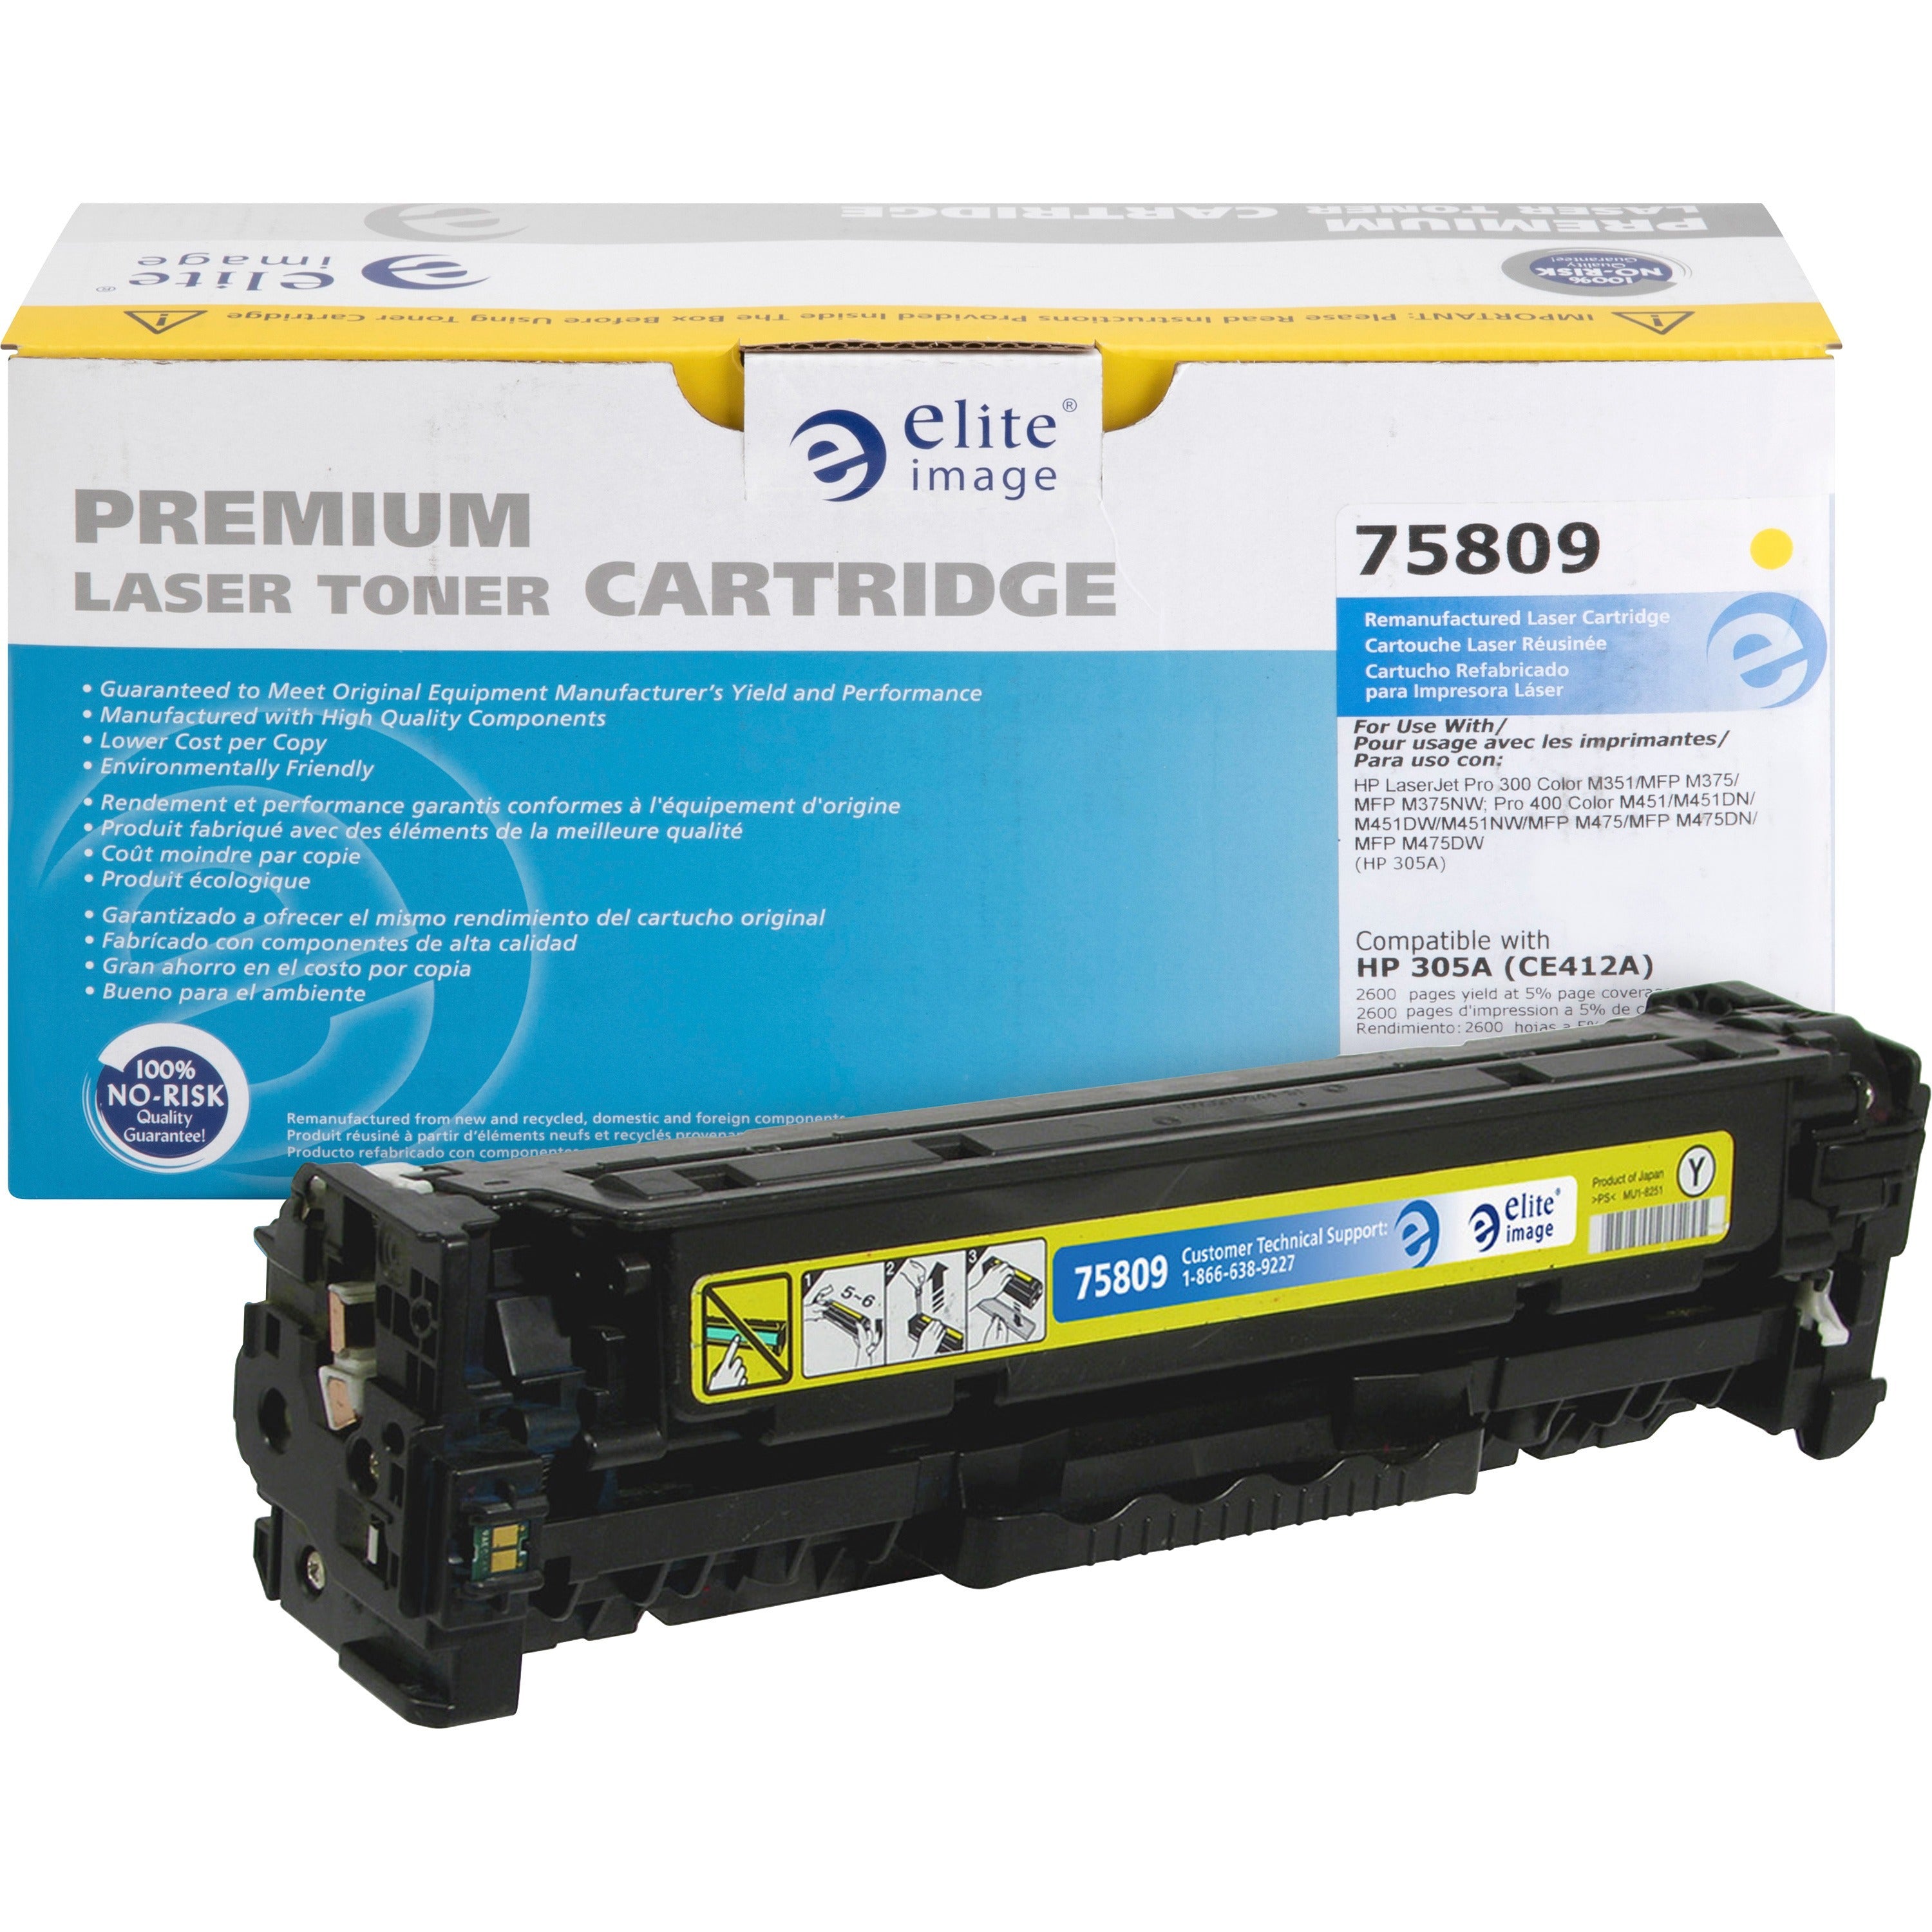 Elite Image Remanufactured Laser Toner Cartridge - Alternative for HP 305A (CE412A) - Yellow - 1 Each - 2600 Pages - 1